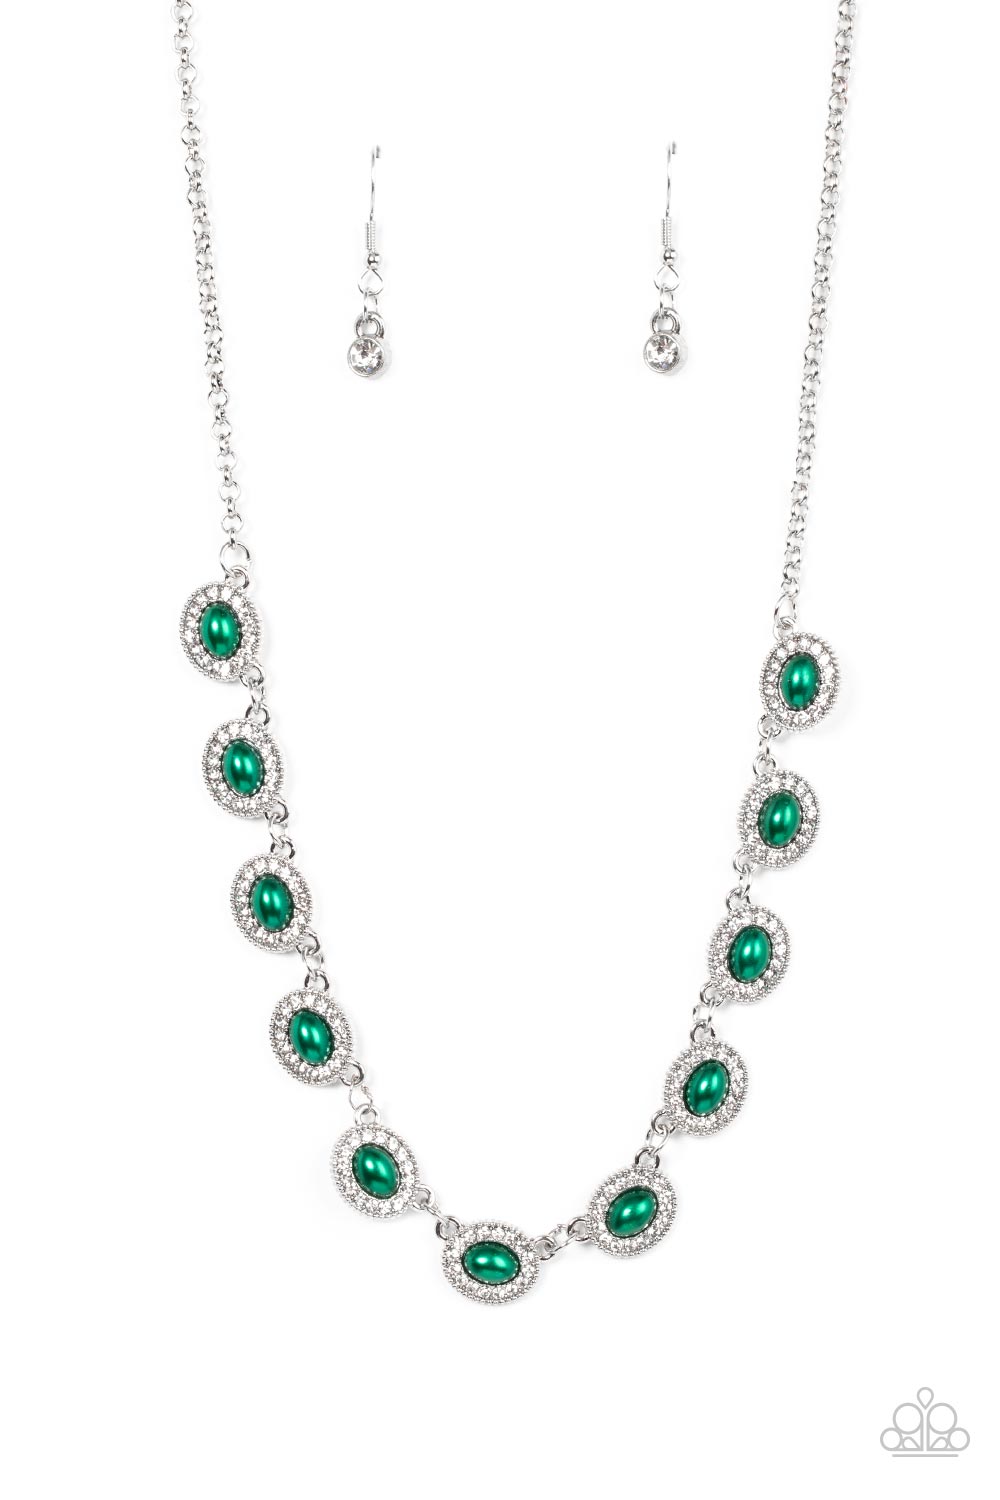 Modest Masterpiece - Green Pearl Necklace - Paparazzi Accessories - Encased in rings of glassy white rhinestones, oval Leprechaun pearl dotted frames delicately link into a twinkly display below the collar for a timeless fashion. Features an adjustable clasp closure. Sold as one individual necklace.